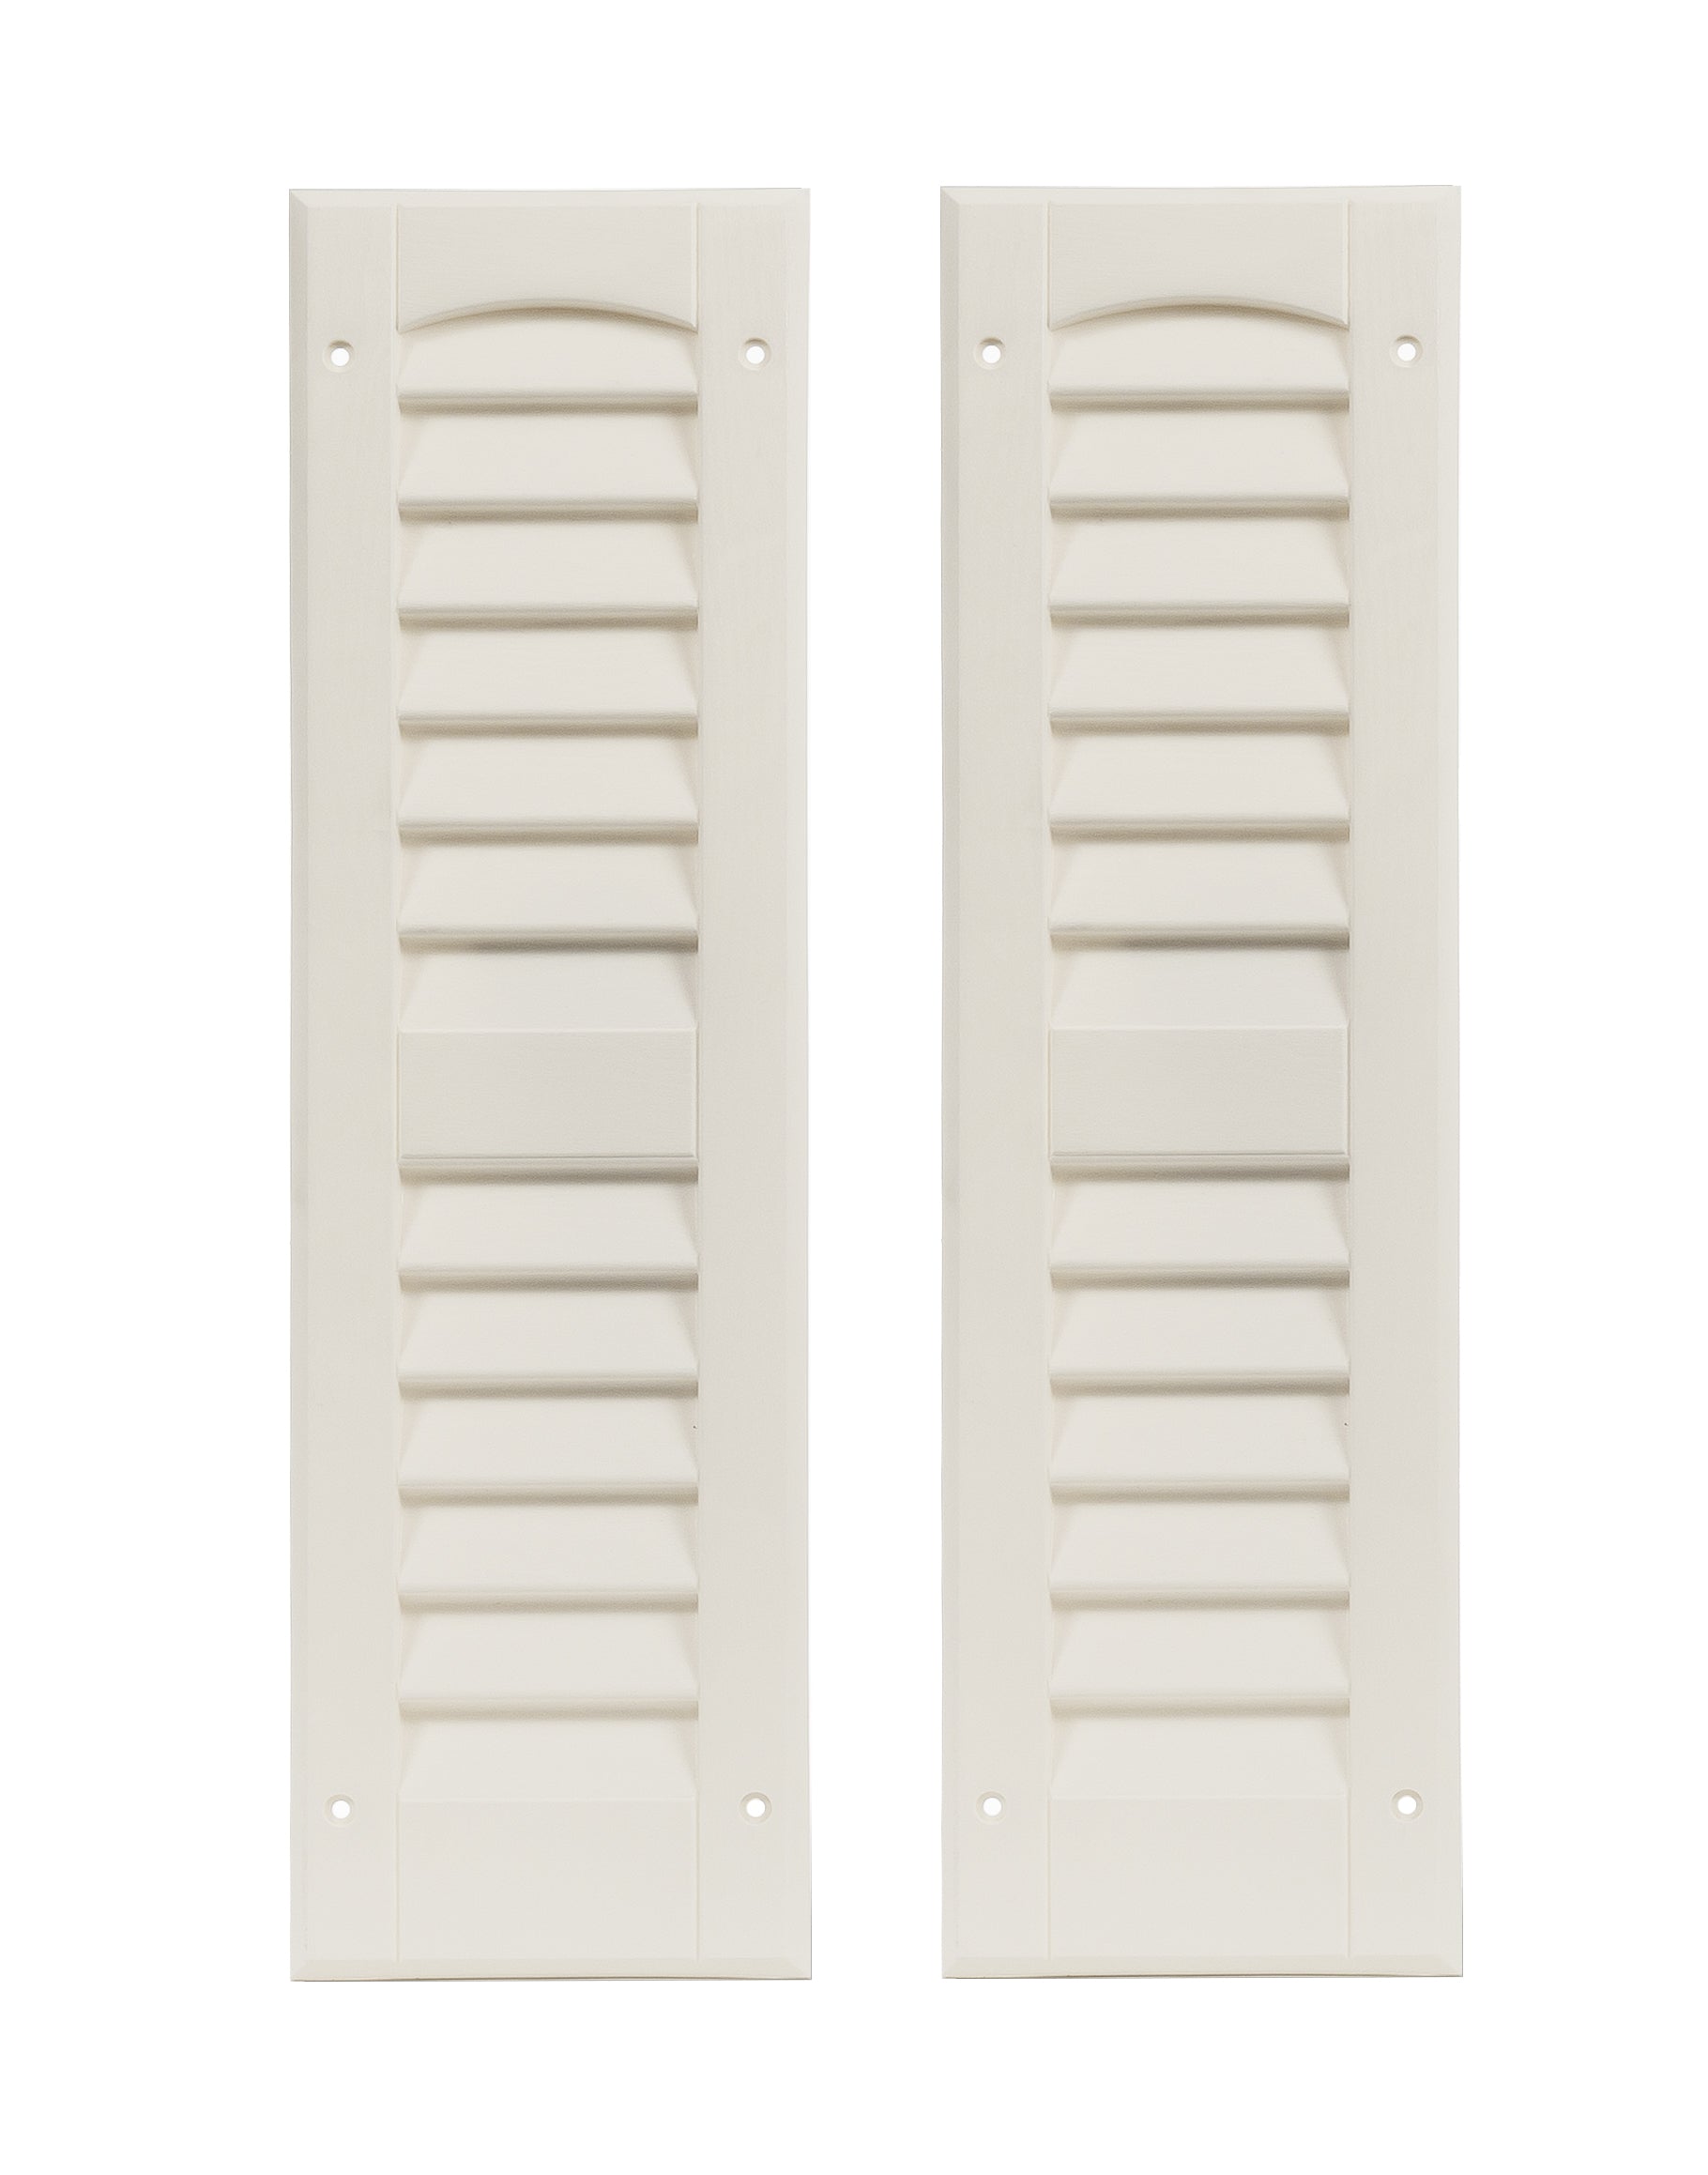 Pair of 6" W x 21" H Louvered Shutters for Sheds, Playhouses, and MORE 